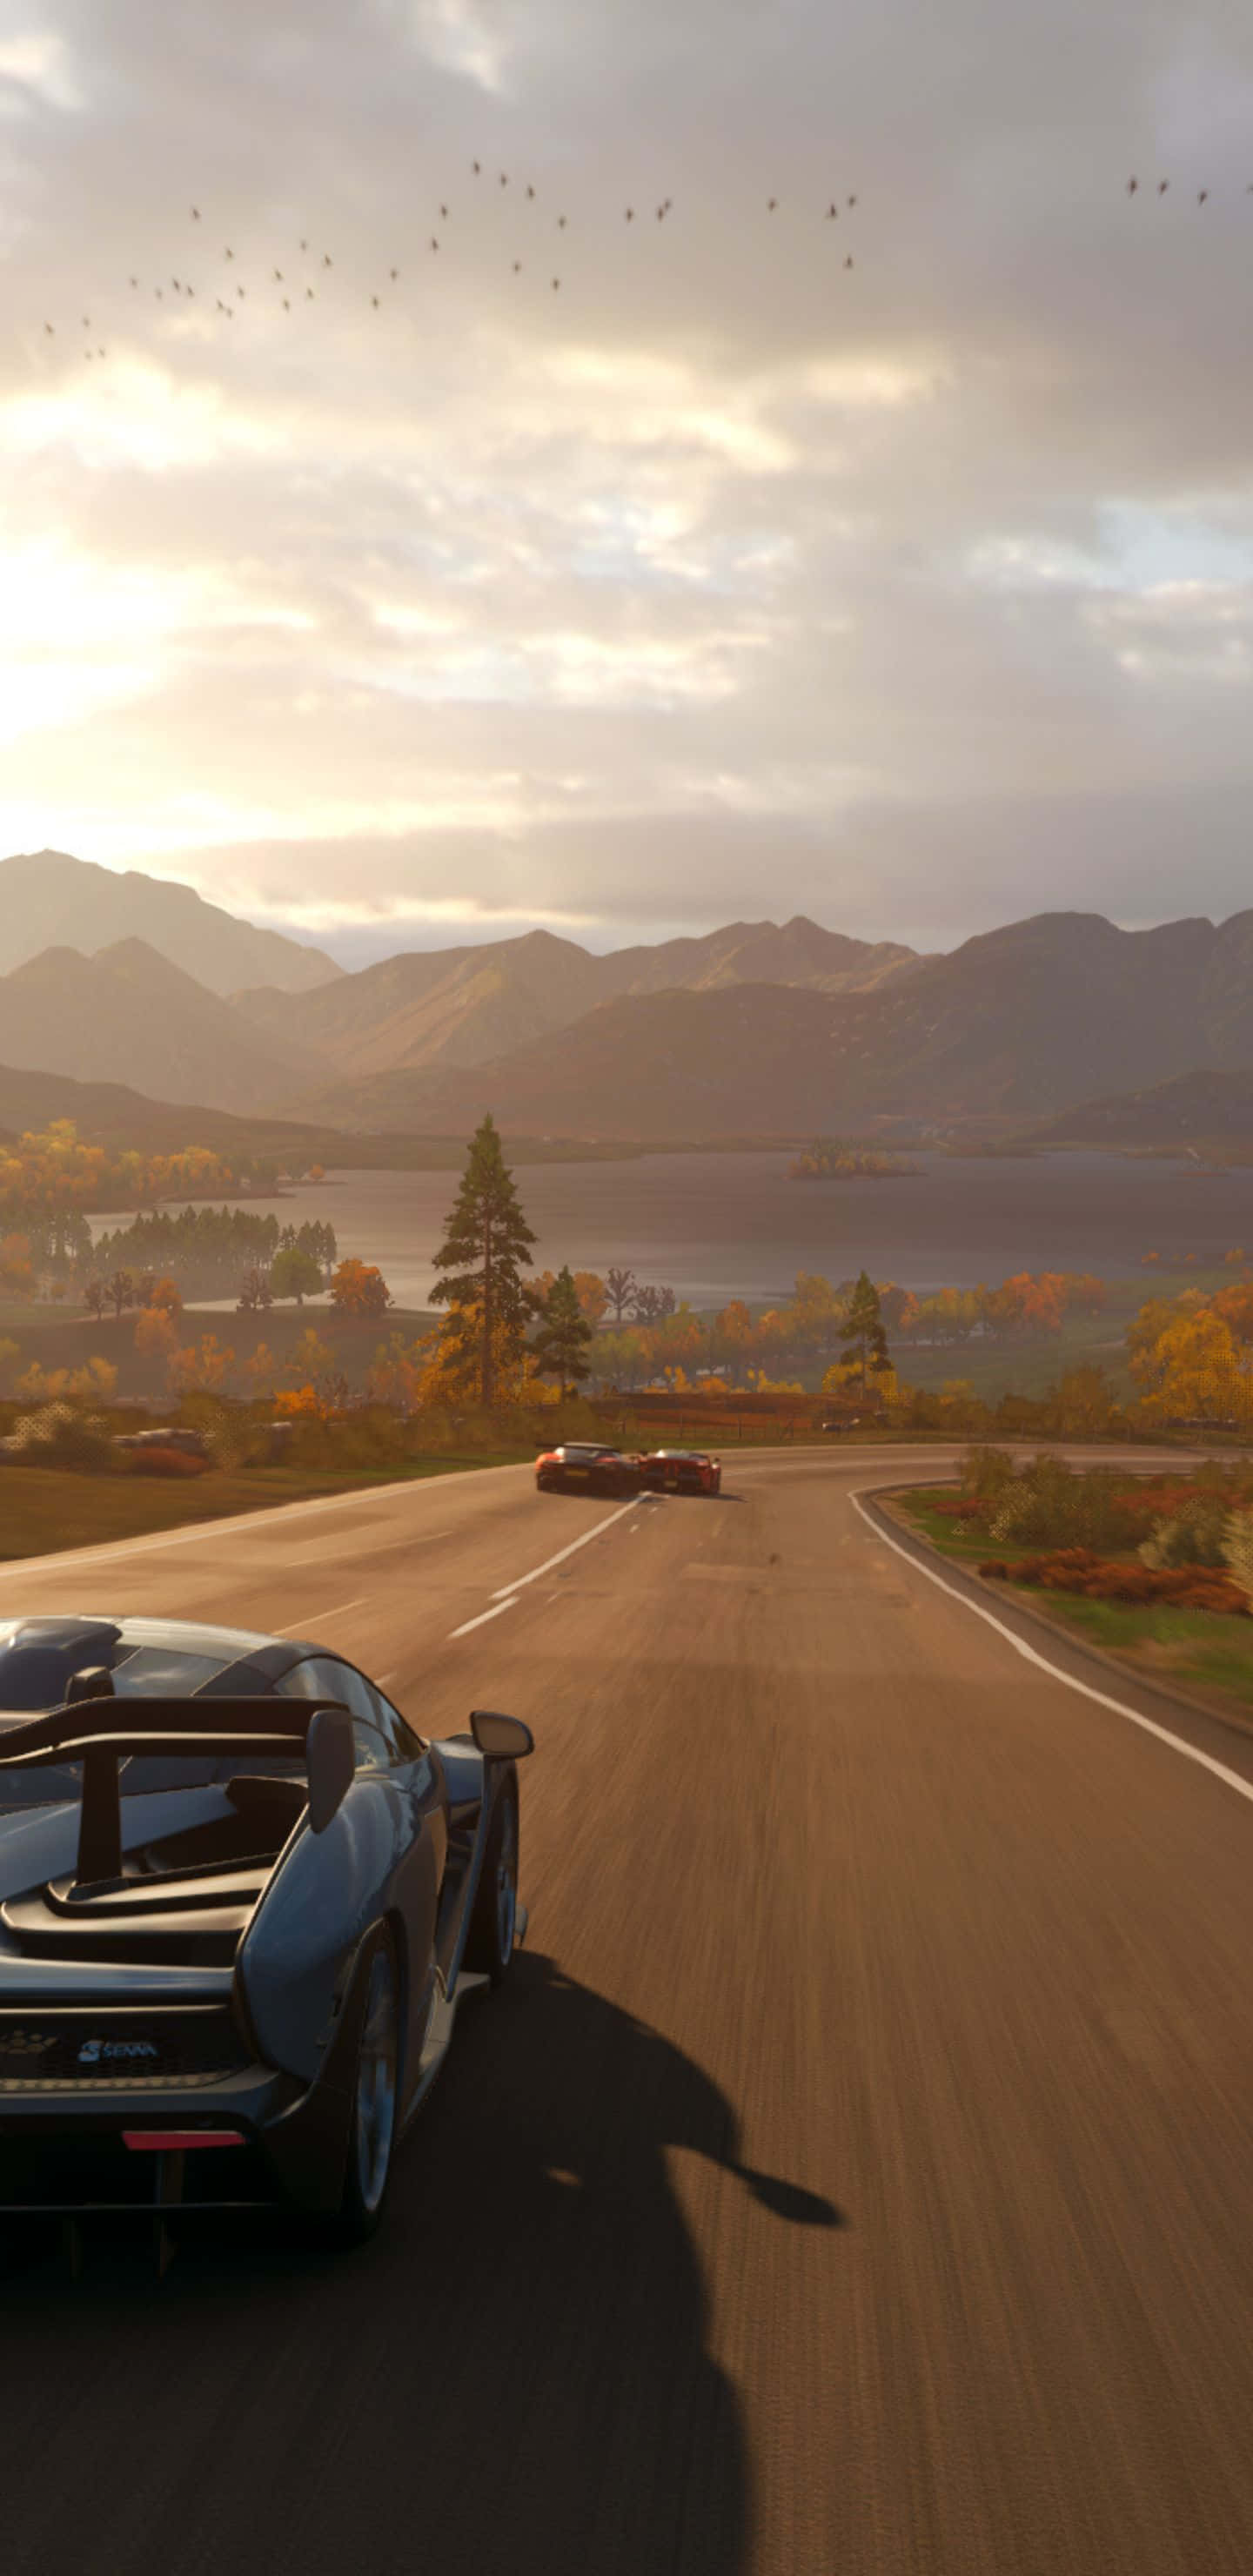 Unlock new levels of adventure with the new Pixel 3XL and Forza Horizon 4.